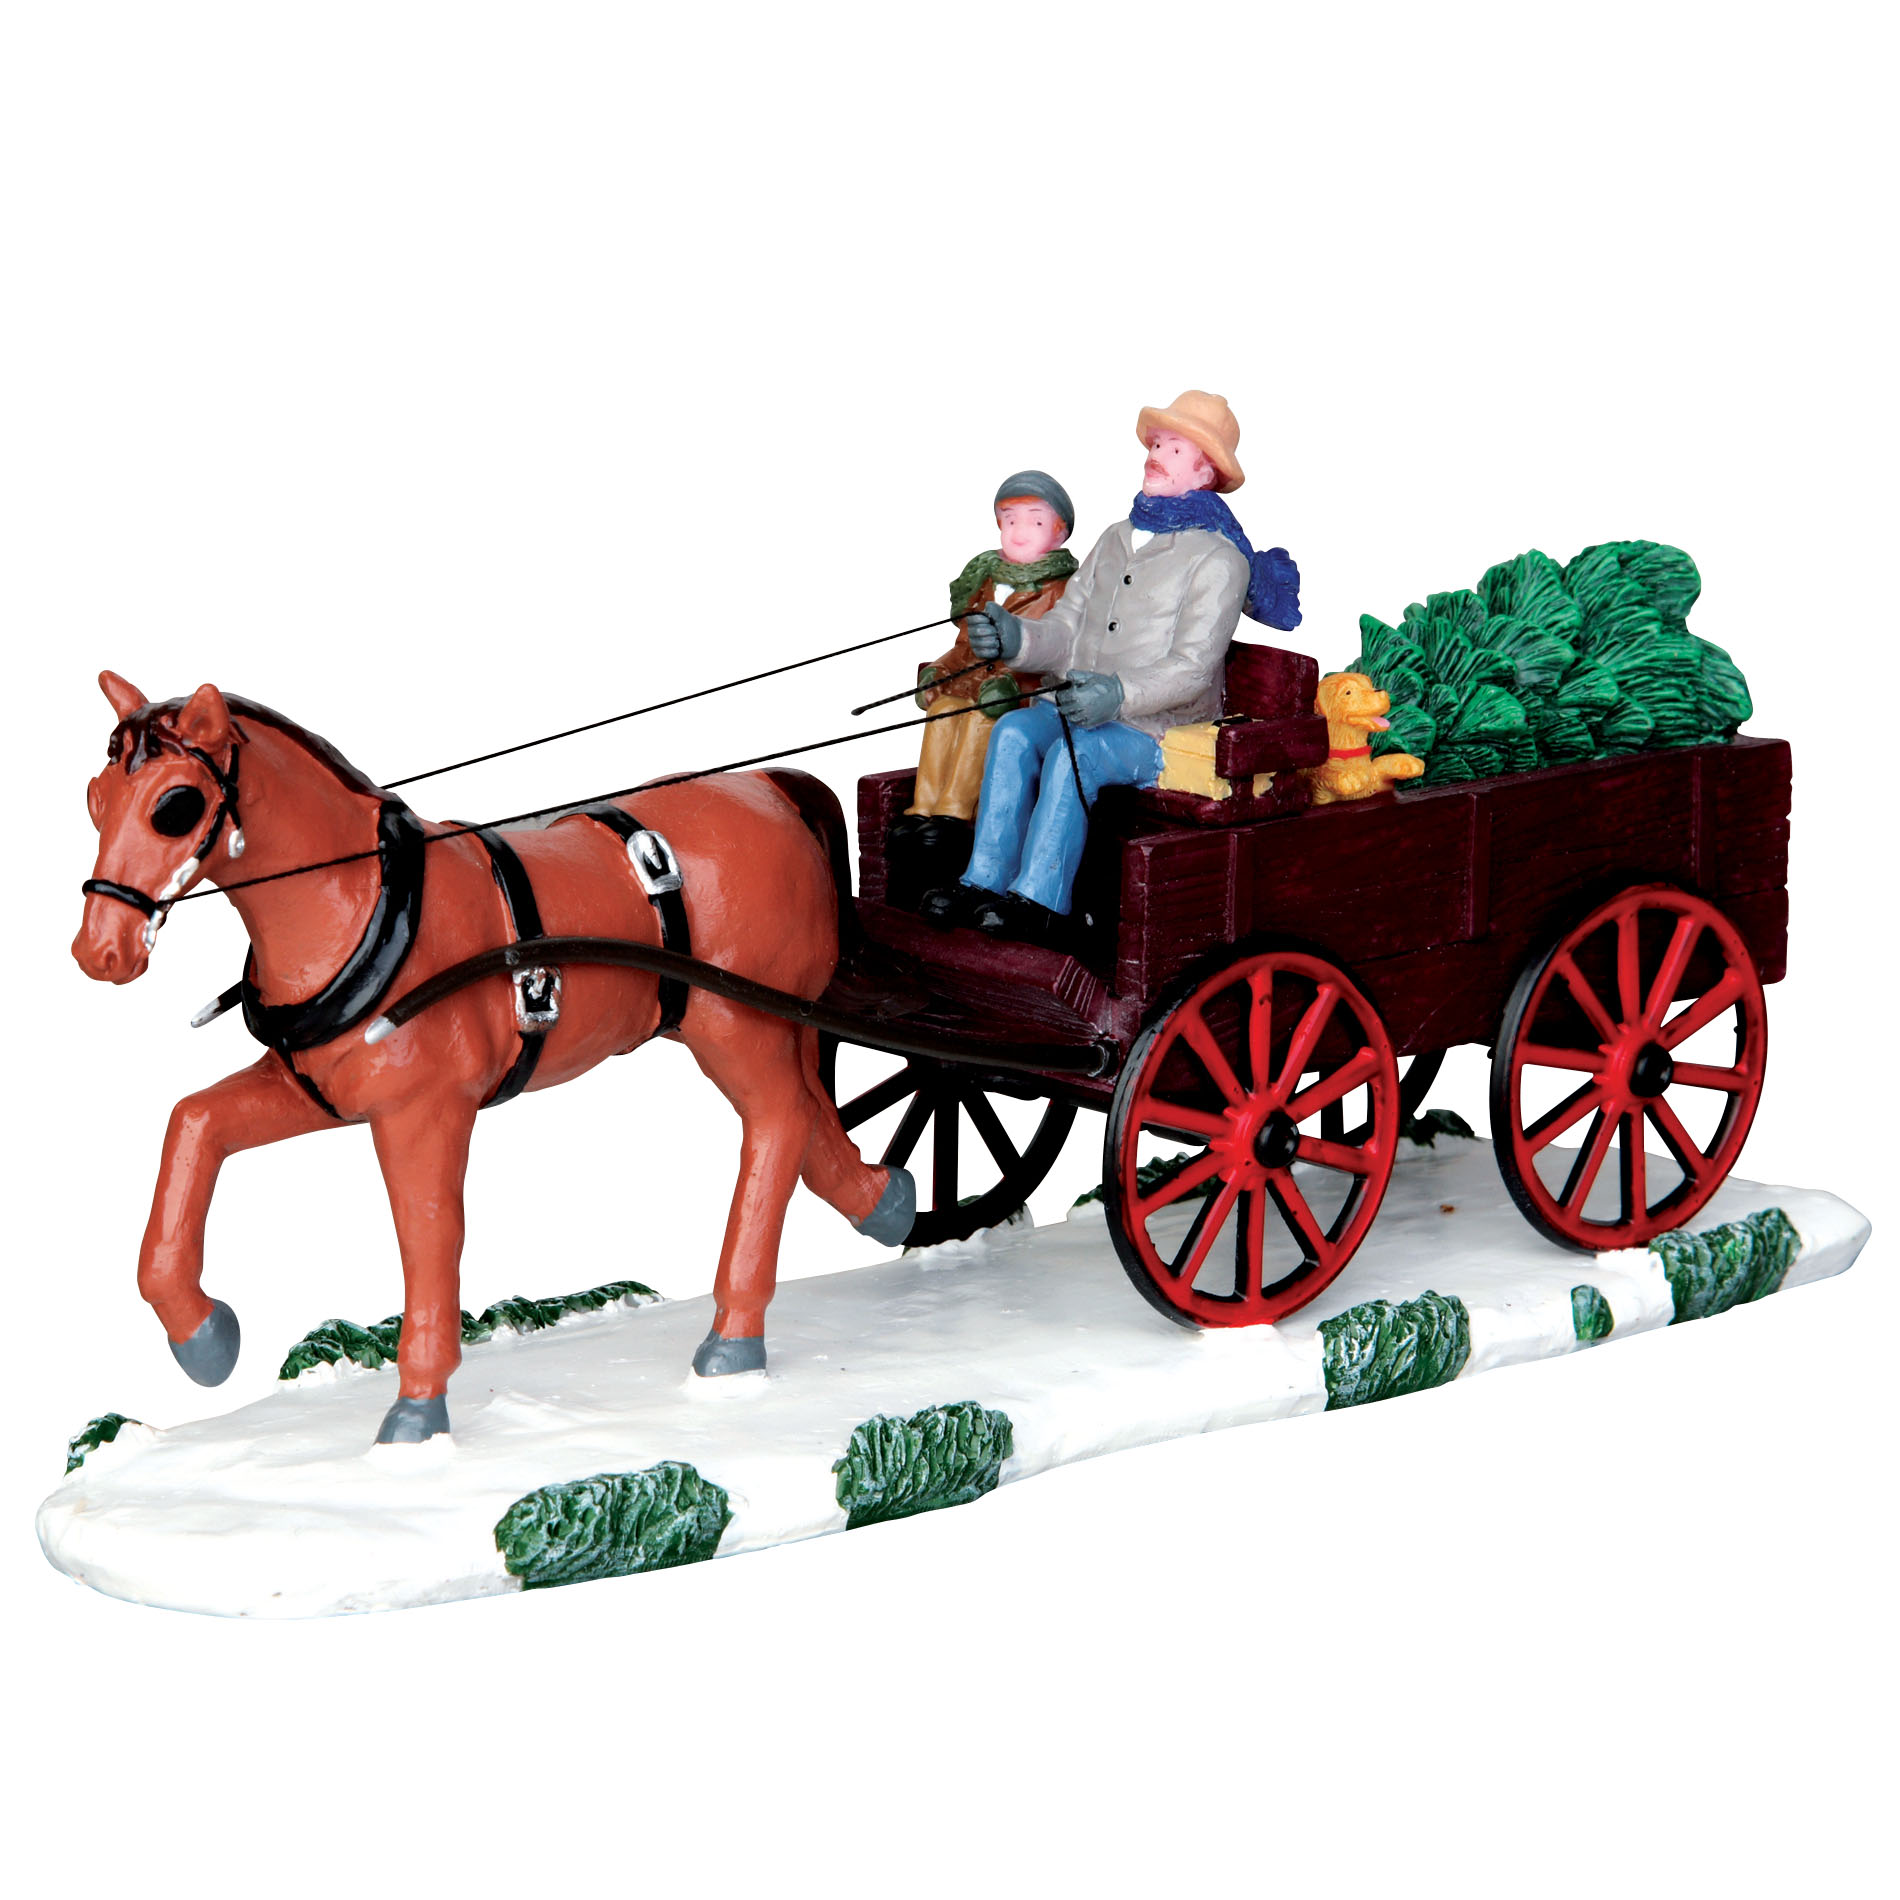 Lemax Village Collection Christmas Village Accessory, Bringing Home The Christmas Tree